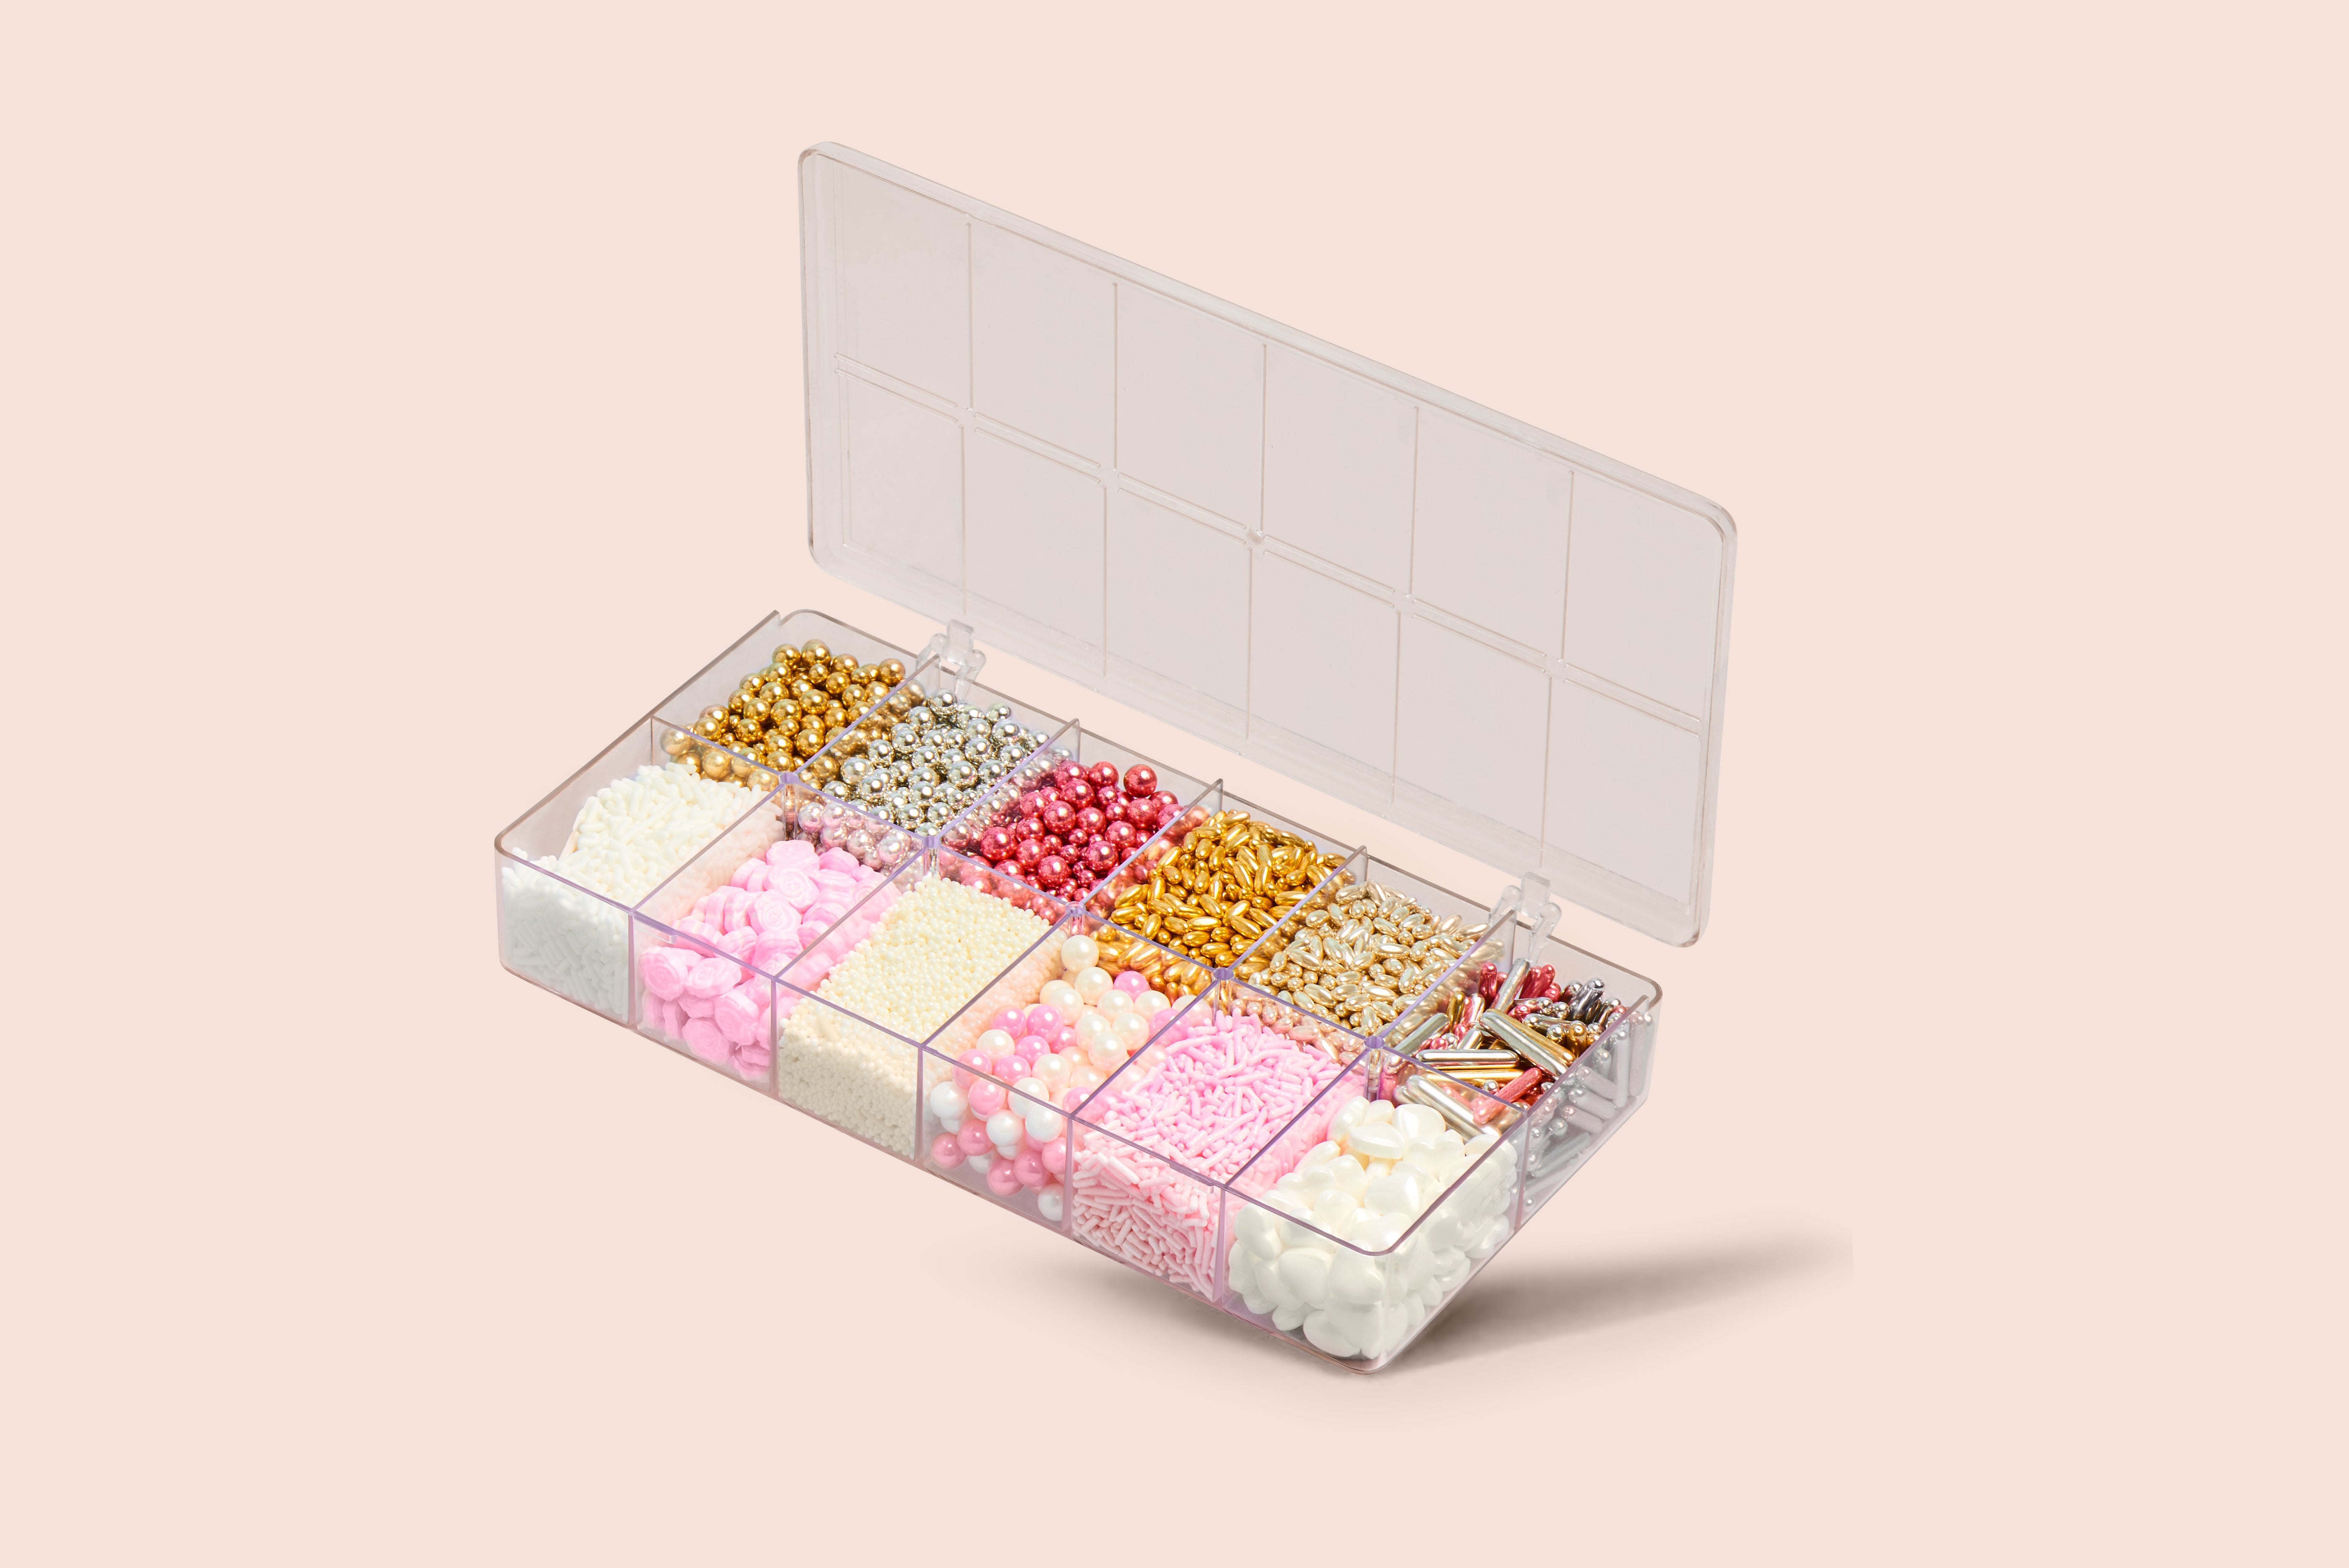 Luxe + Lovely Premium Assorted Sprinkle Box - US